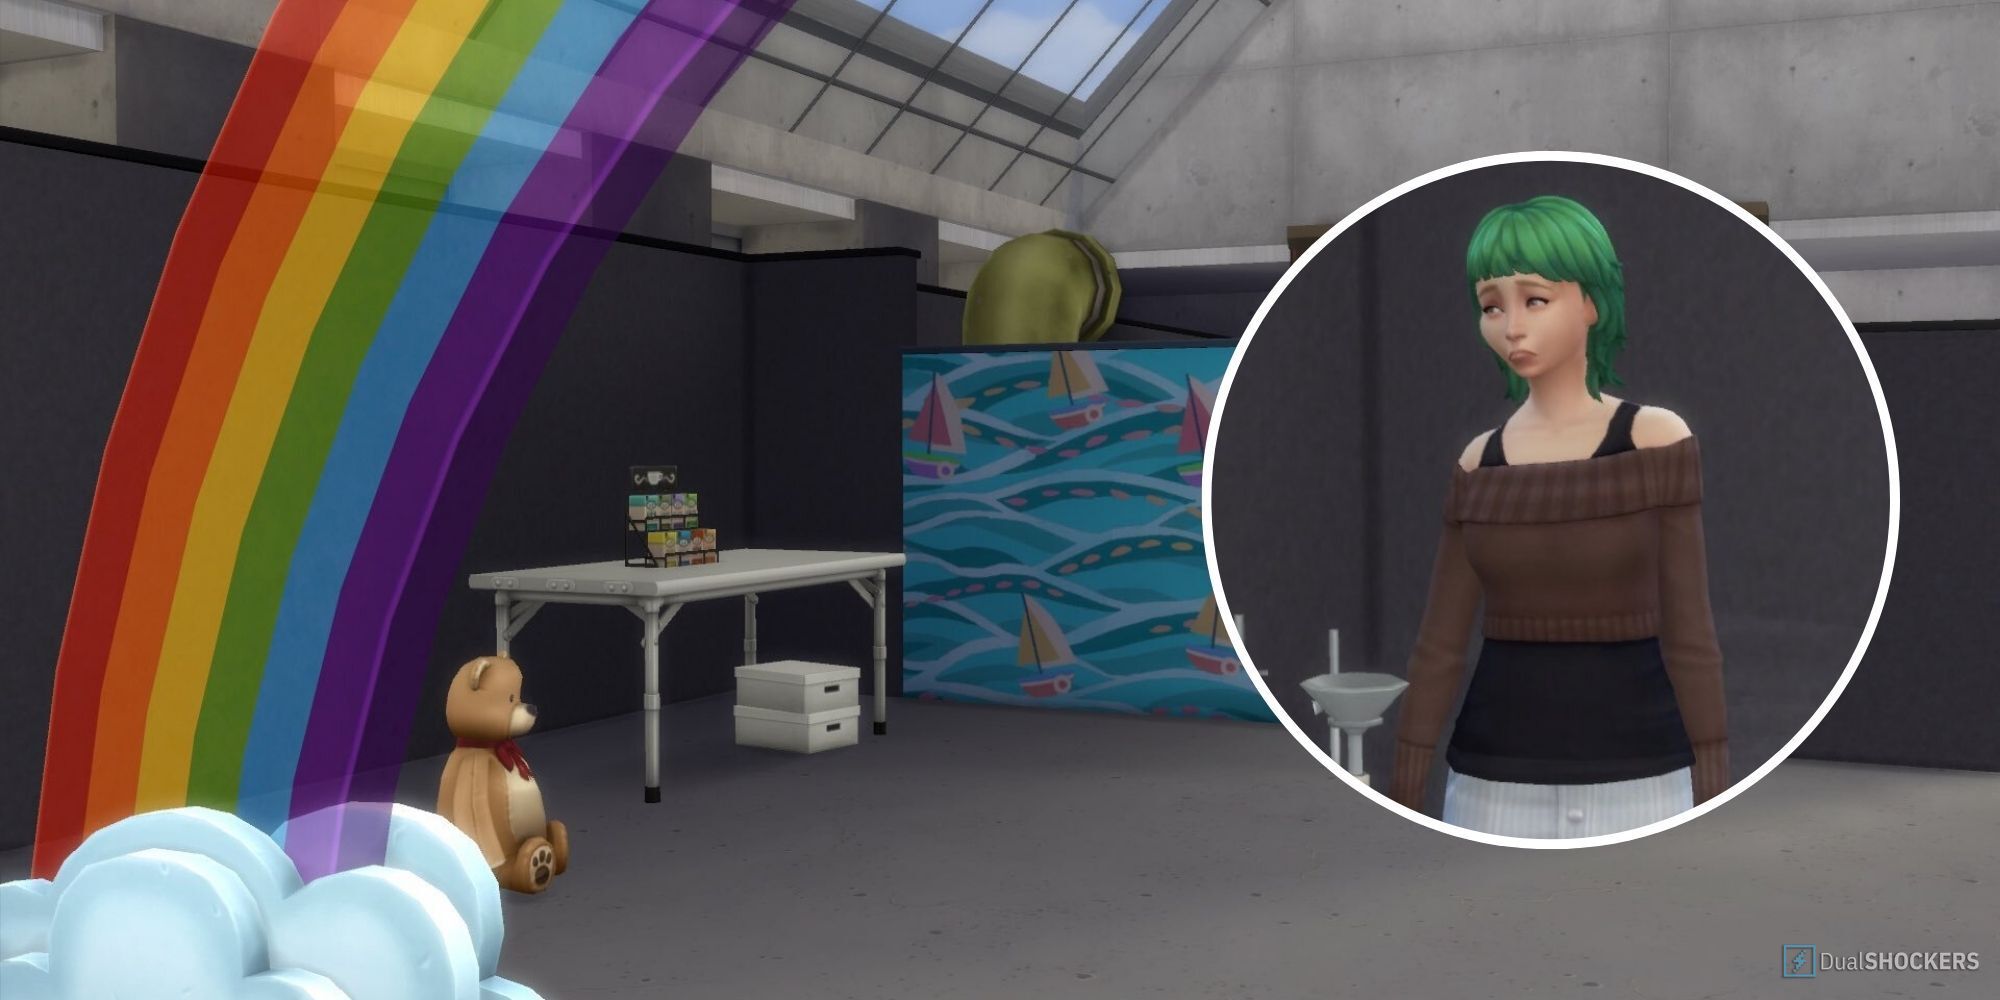 The Willy Wonka experience created in The Sims by TW!?K @imcxllumbtw